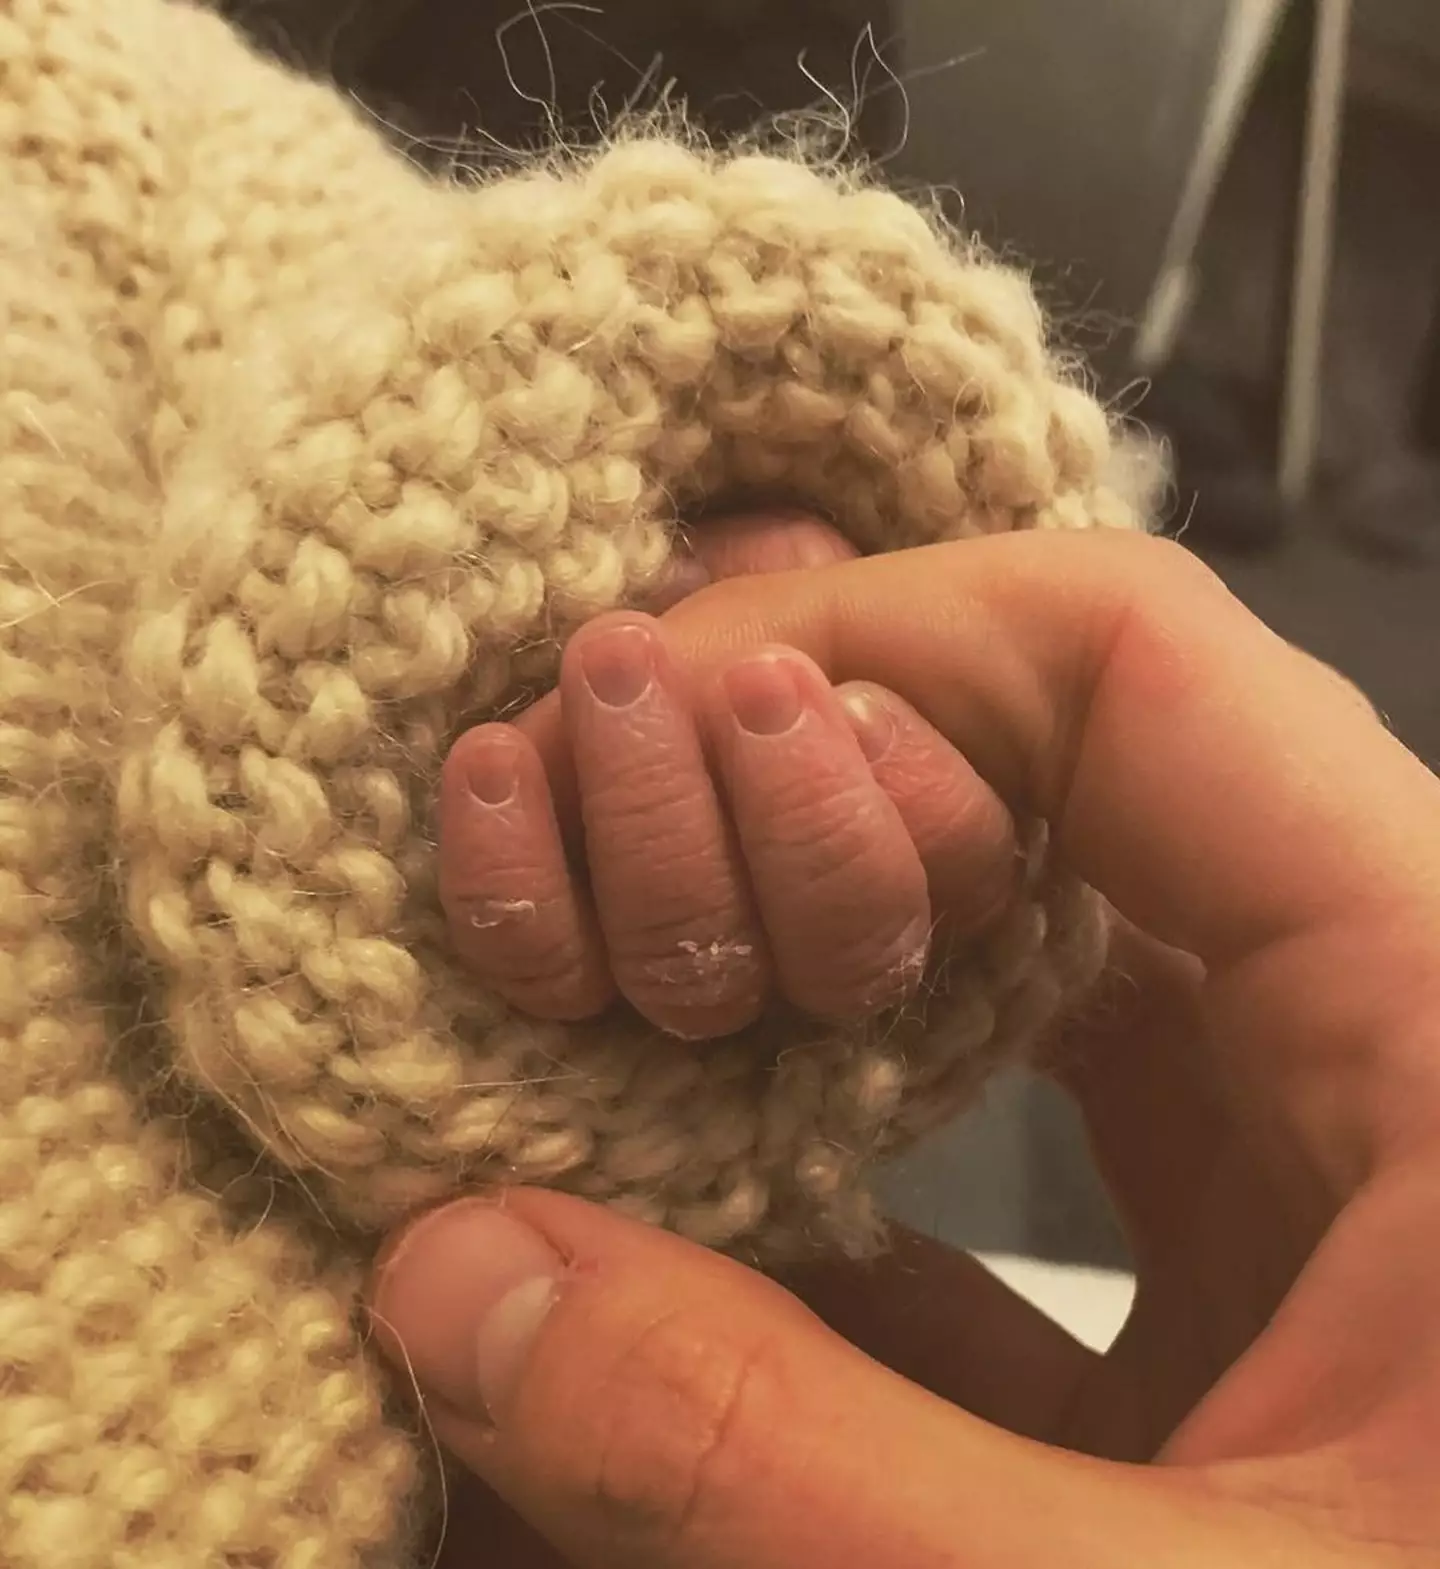 Jess shared a sweet snap of the newborn's hand to Instagram.